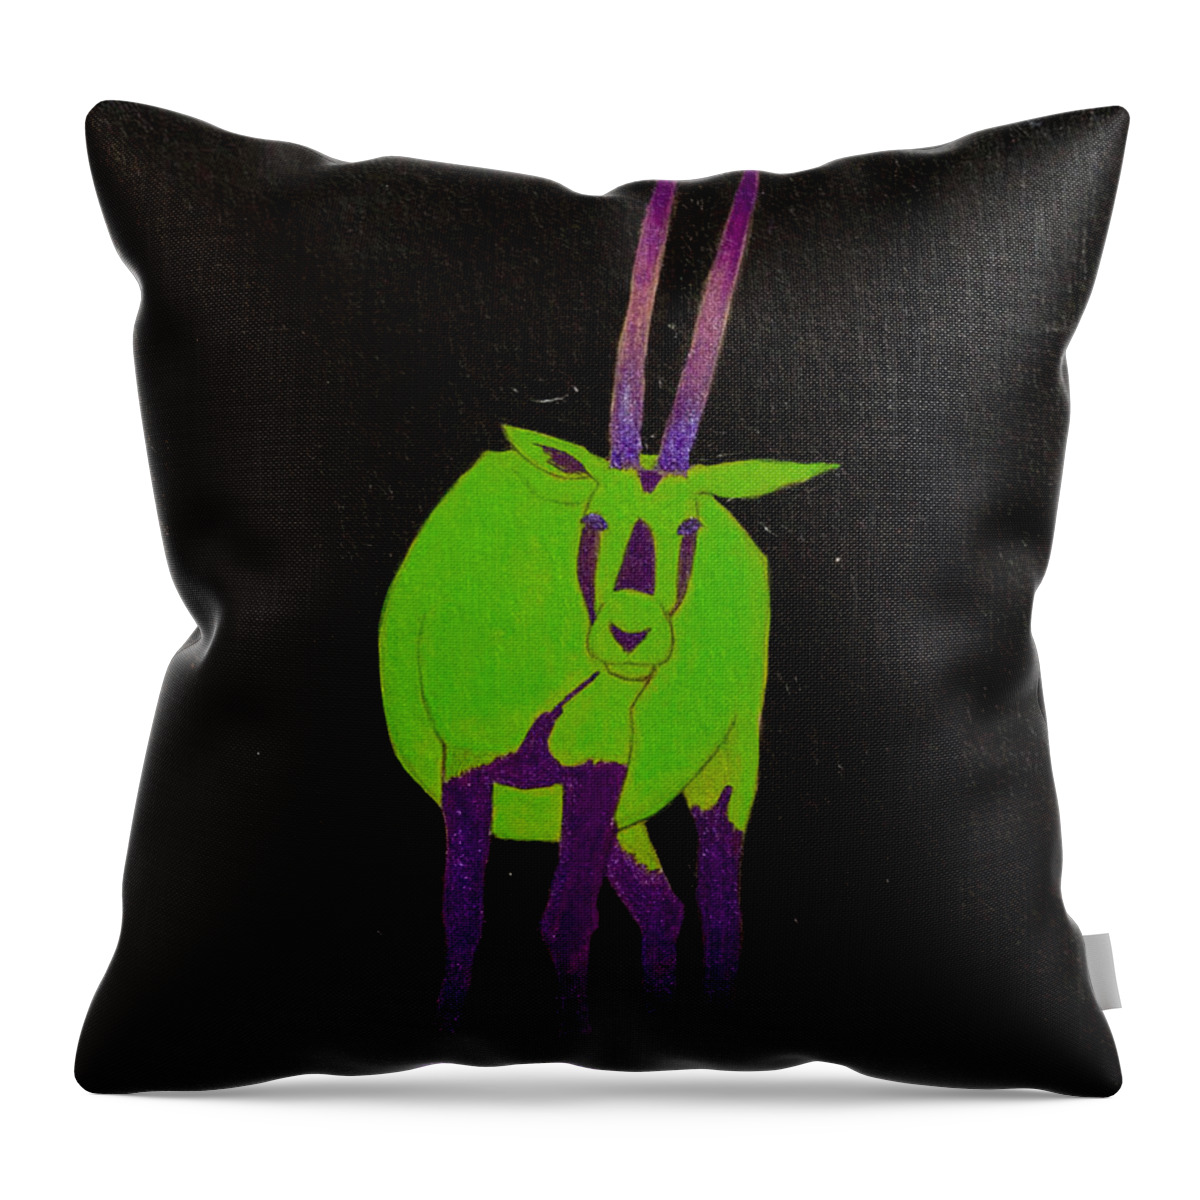  Throw Pillow featuring the painting Arabian Oryx by Stefanie Forck